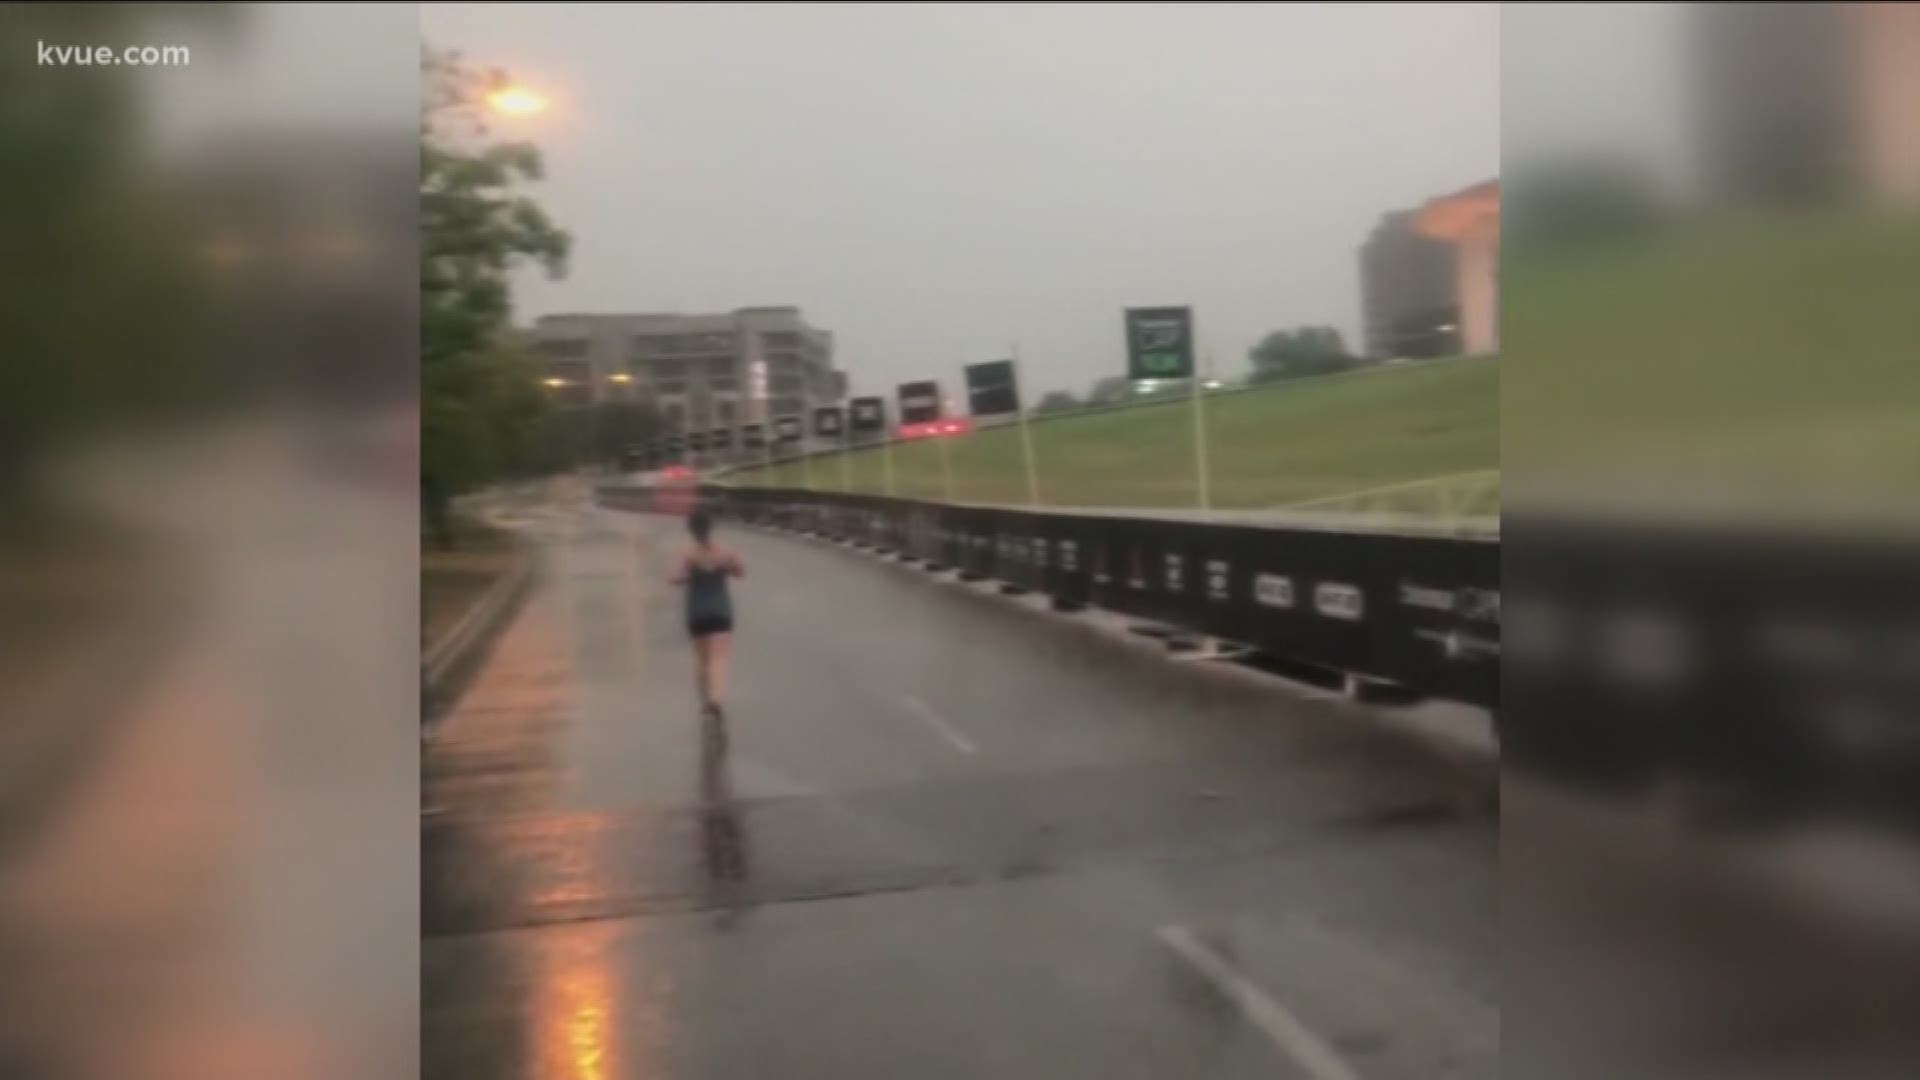 For the first time in its 42-year history, the Statesman Capitol 10K was cancelled.